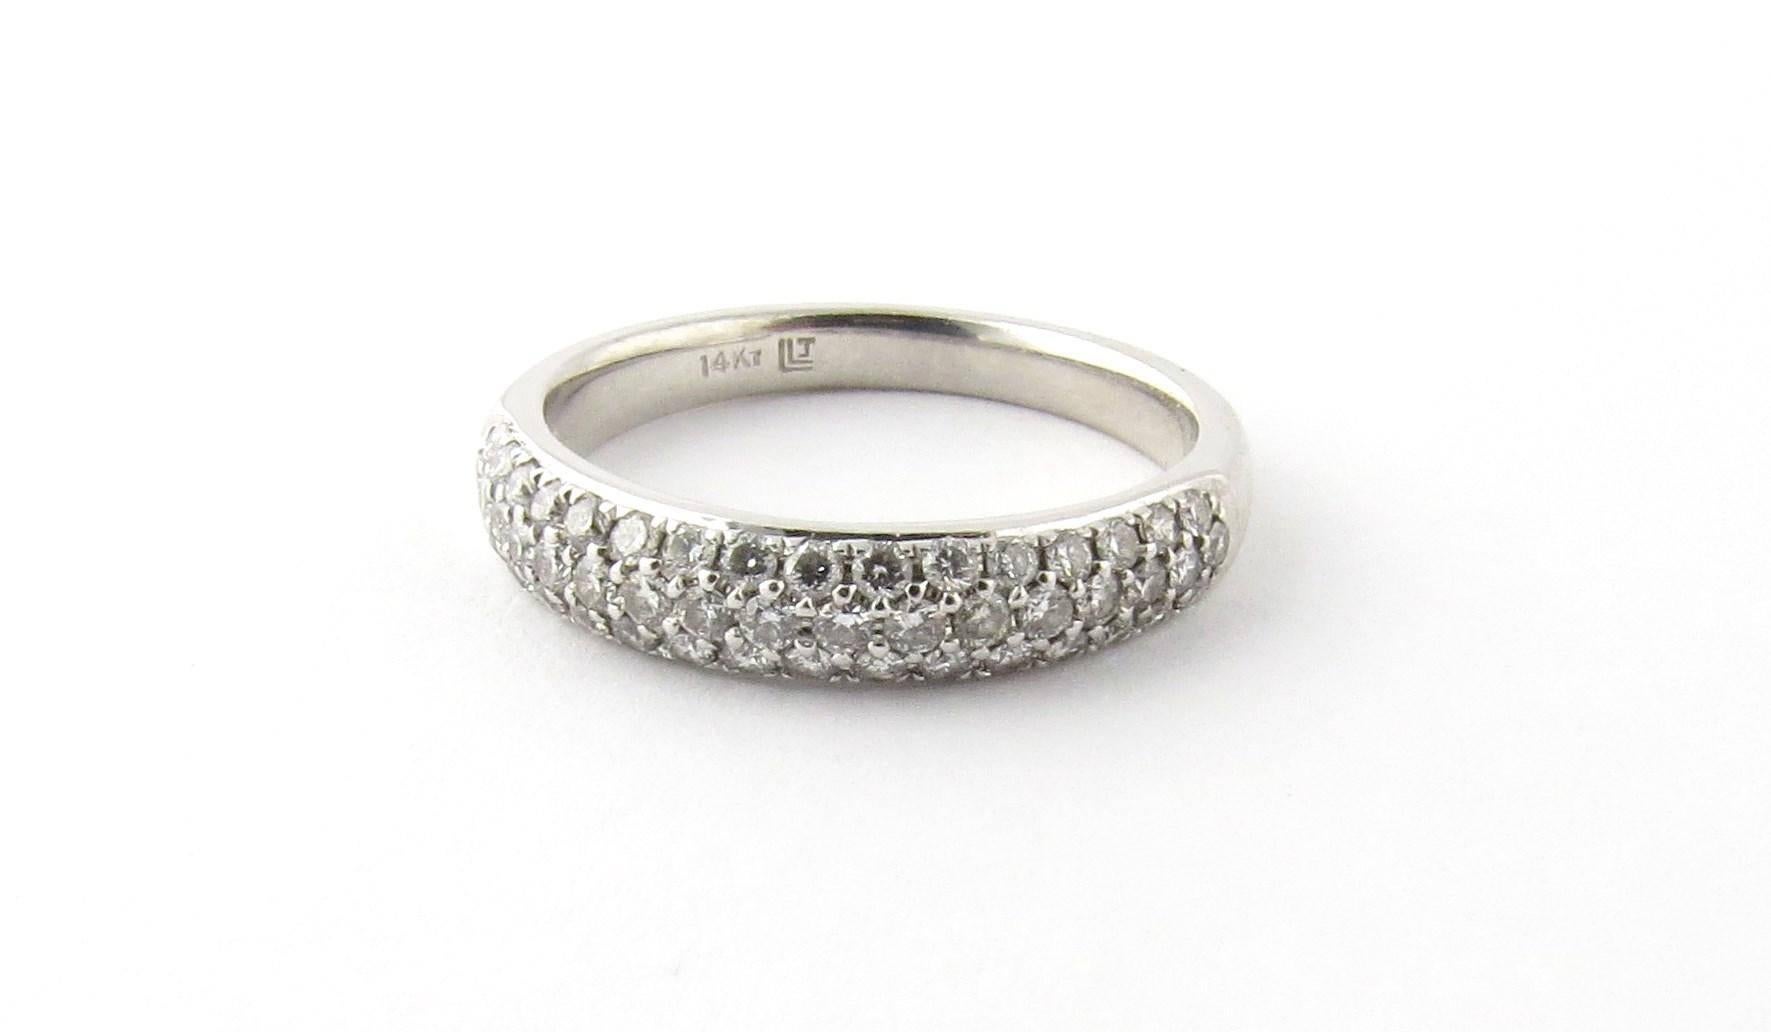 Vintage 14K White Gold Diamond Band Size 6.5 

This White Gold band has 3 rows of diamonds half way around the band. 

There are 49 round brilliant diamonds totally approximately .33 cts. Diamonds are of SI clarity and H color. 

The shank is 3 mm.